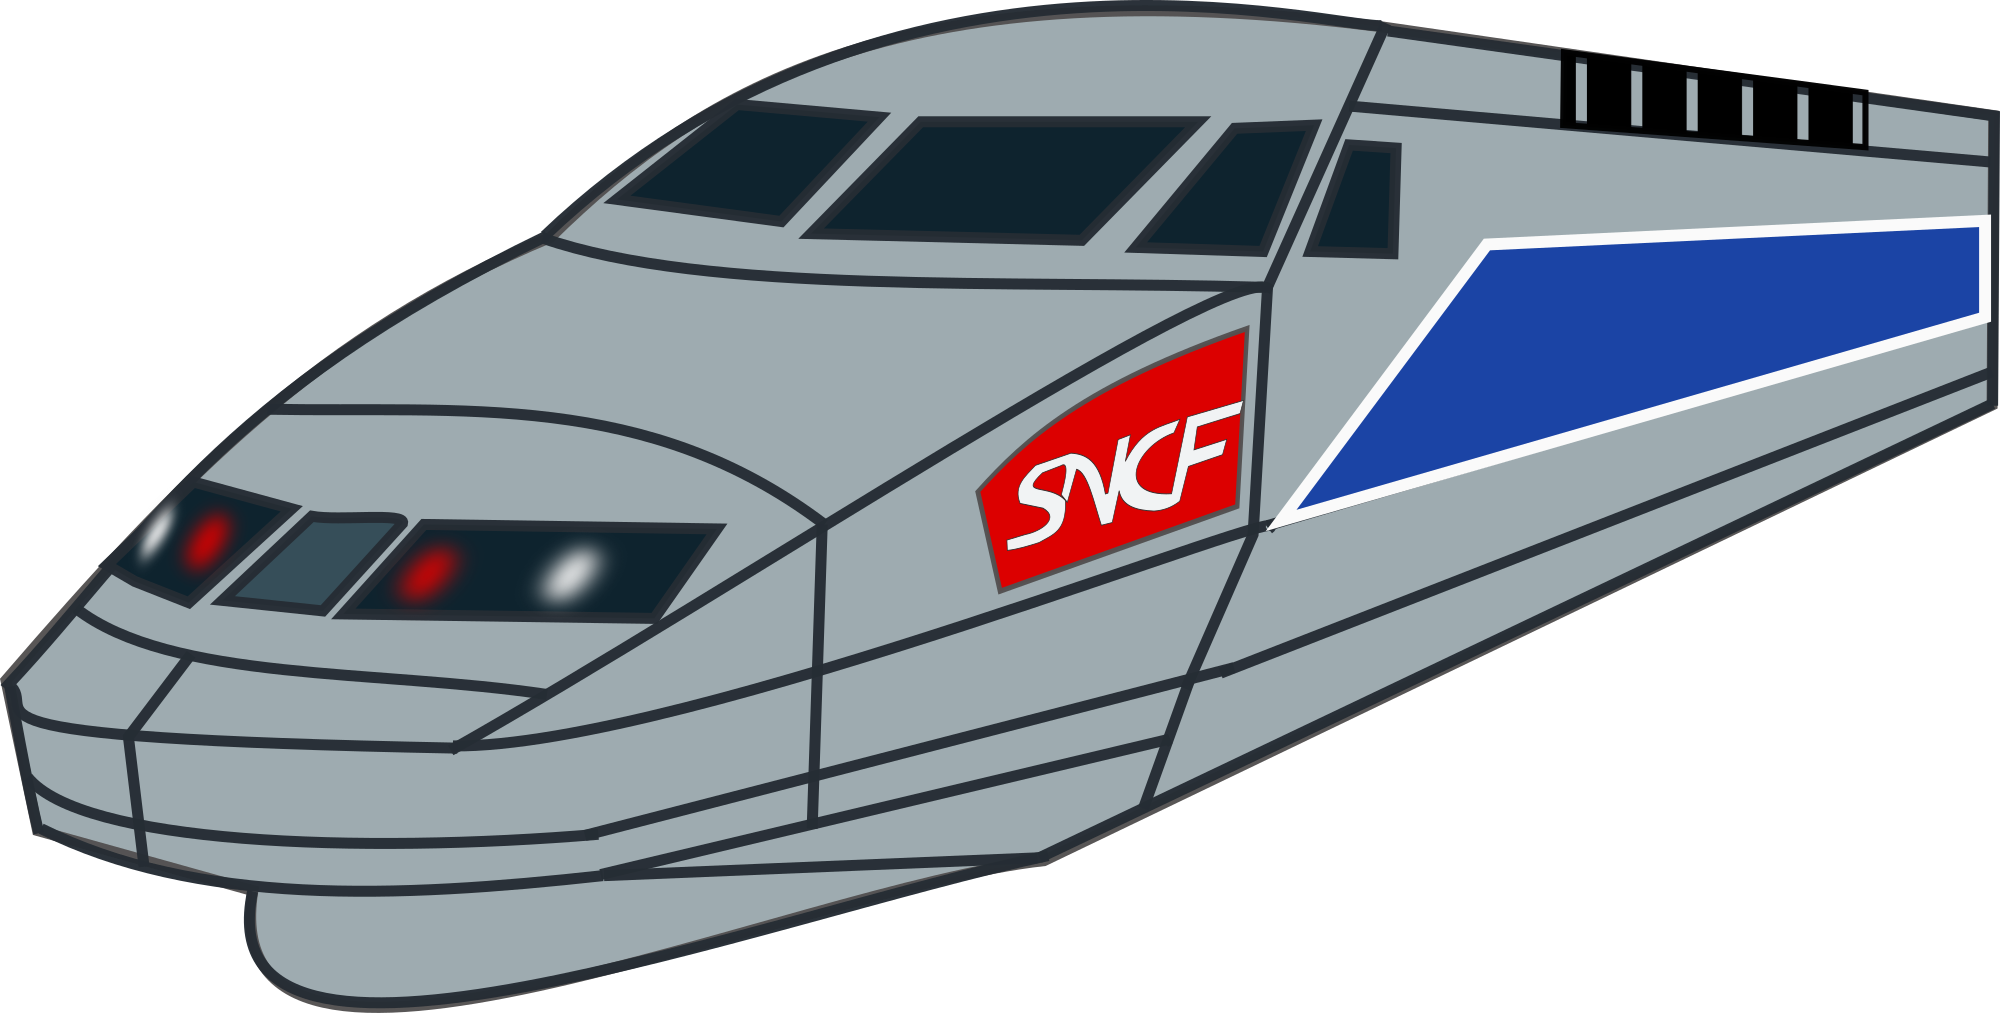 Free Bullet Train And Vector Image Clipart